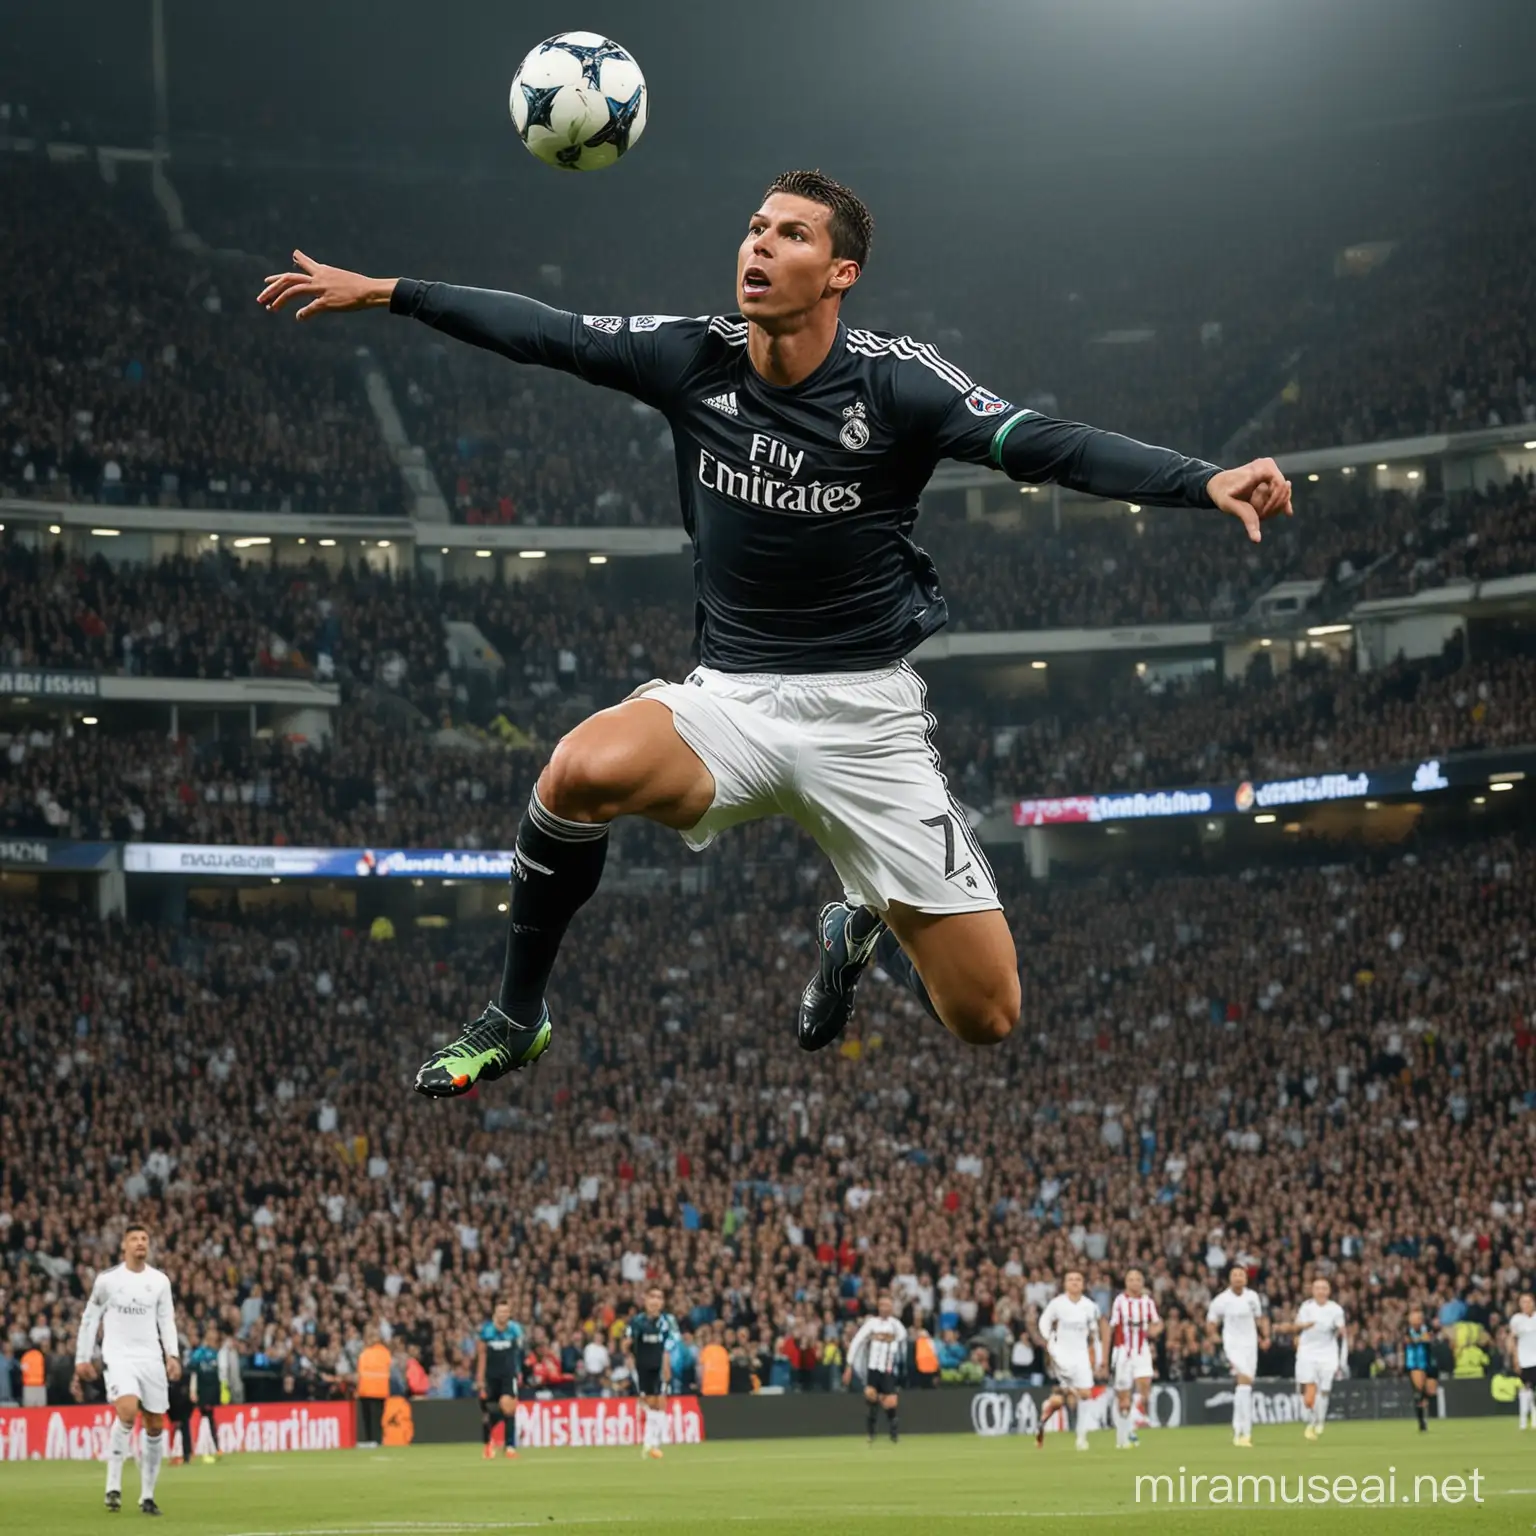 Cristiano Ronaldo Inspired Soccer Header with Audience Watching